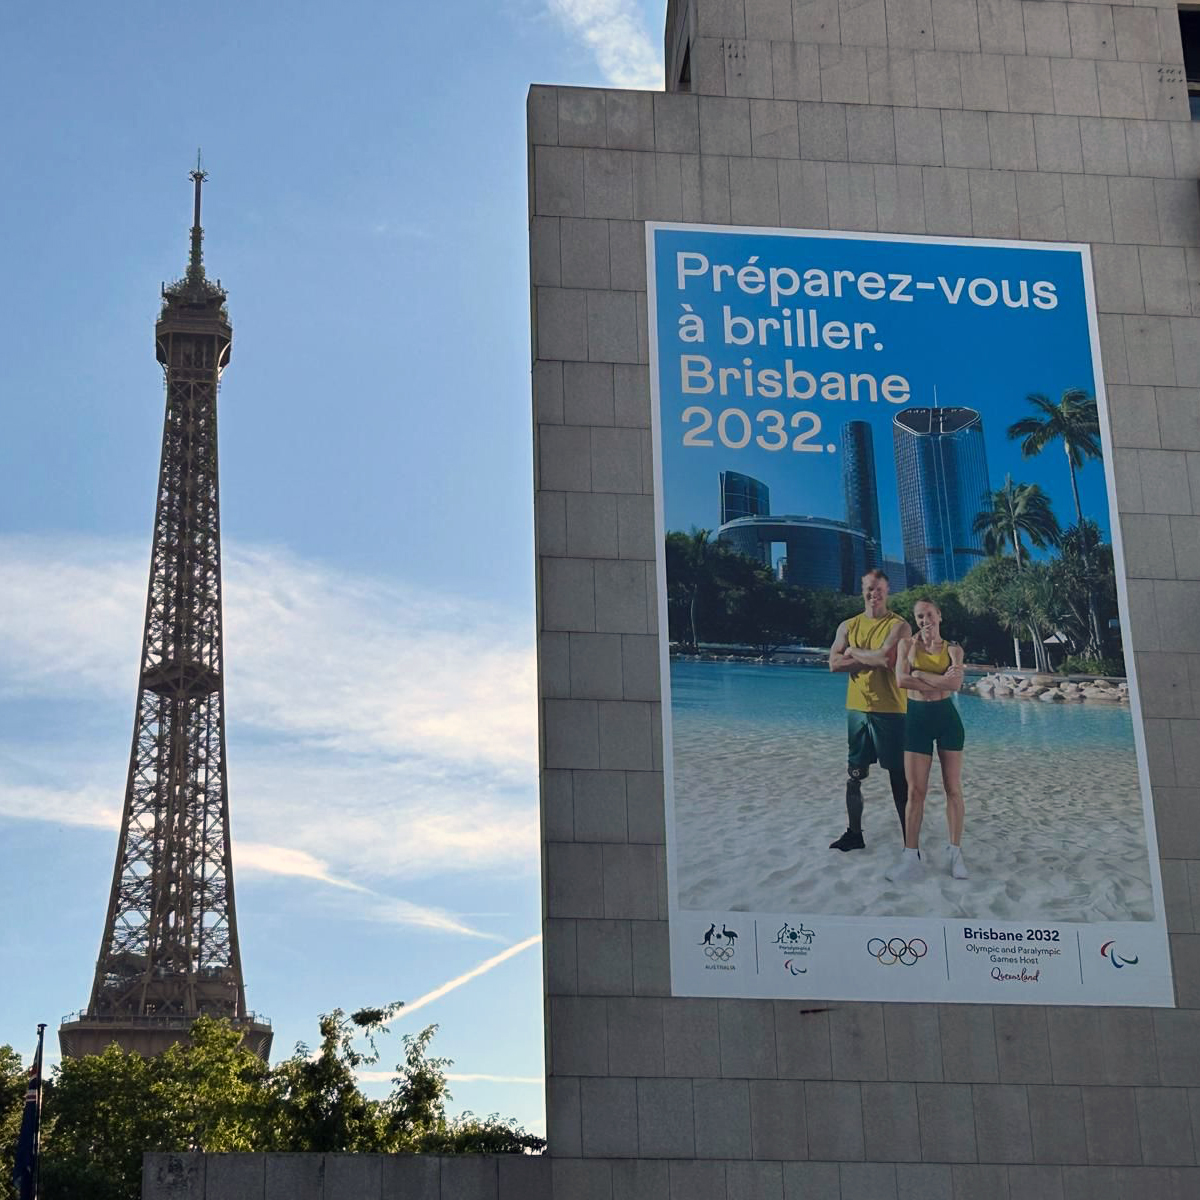 An image of the Brisbane 2032 billboard in Paris that features Logan athlete Genevieve Gregson. The Eiffel Tower is in the background.